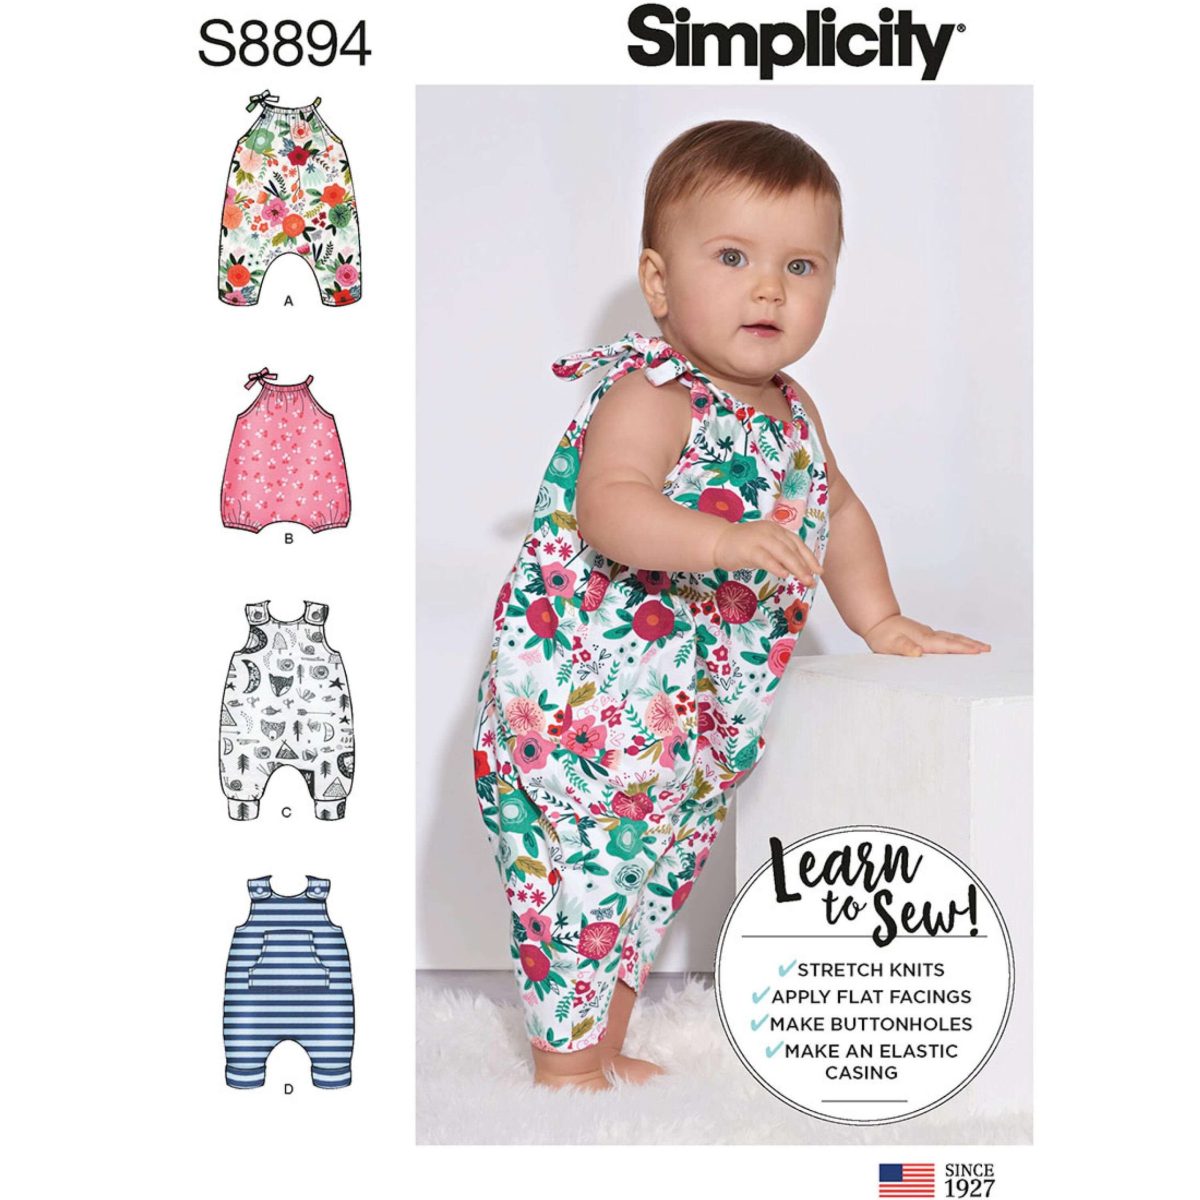 Simplicity Sewing Pattern S8894 Babies' Romper suits designed for stretch knits